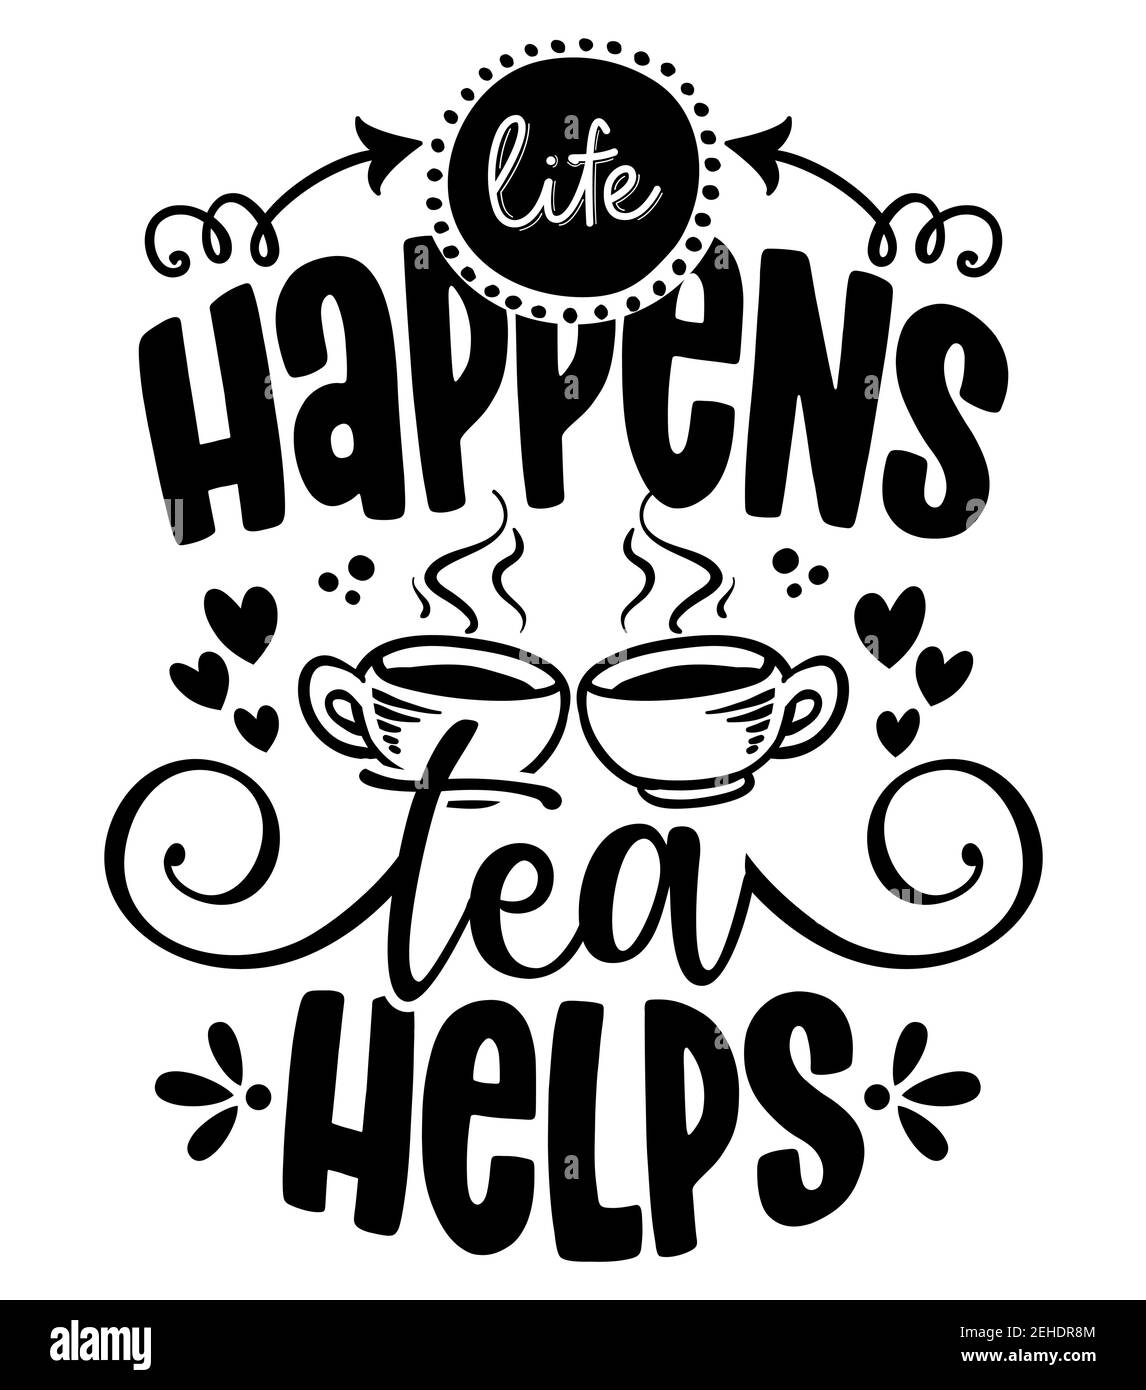 Life happens, Tea helps - design for t-shirts, cards, restaurant or coffee shop wall decoration. Hand painted brush pen modern calligraphy isolated on Stock Vector